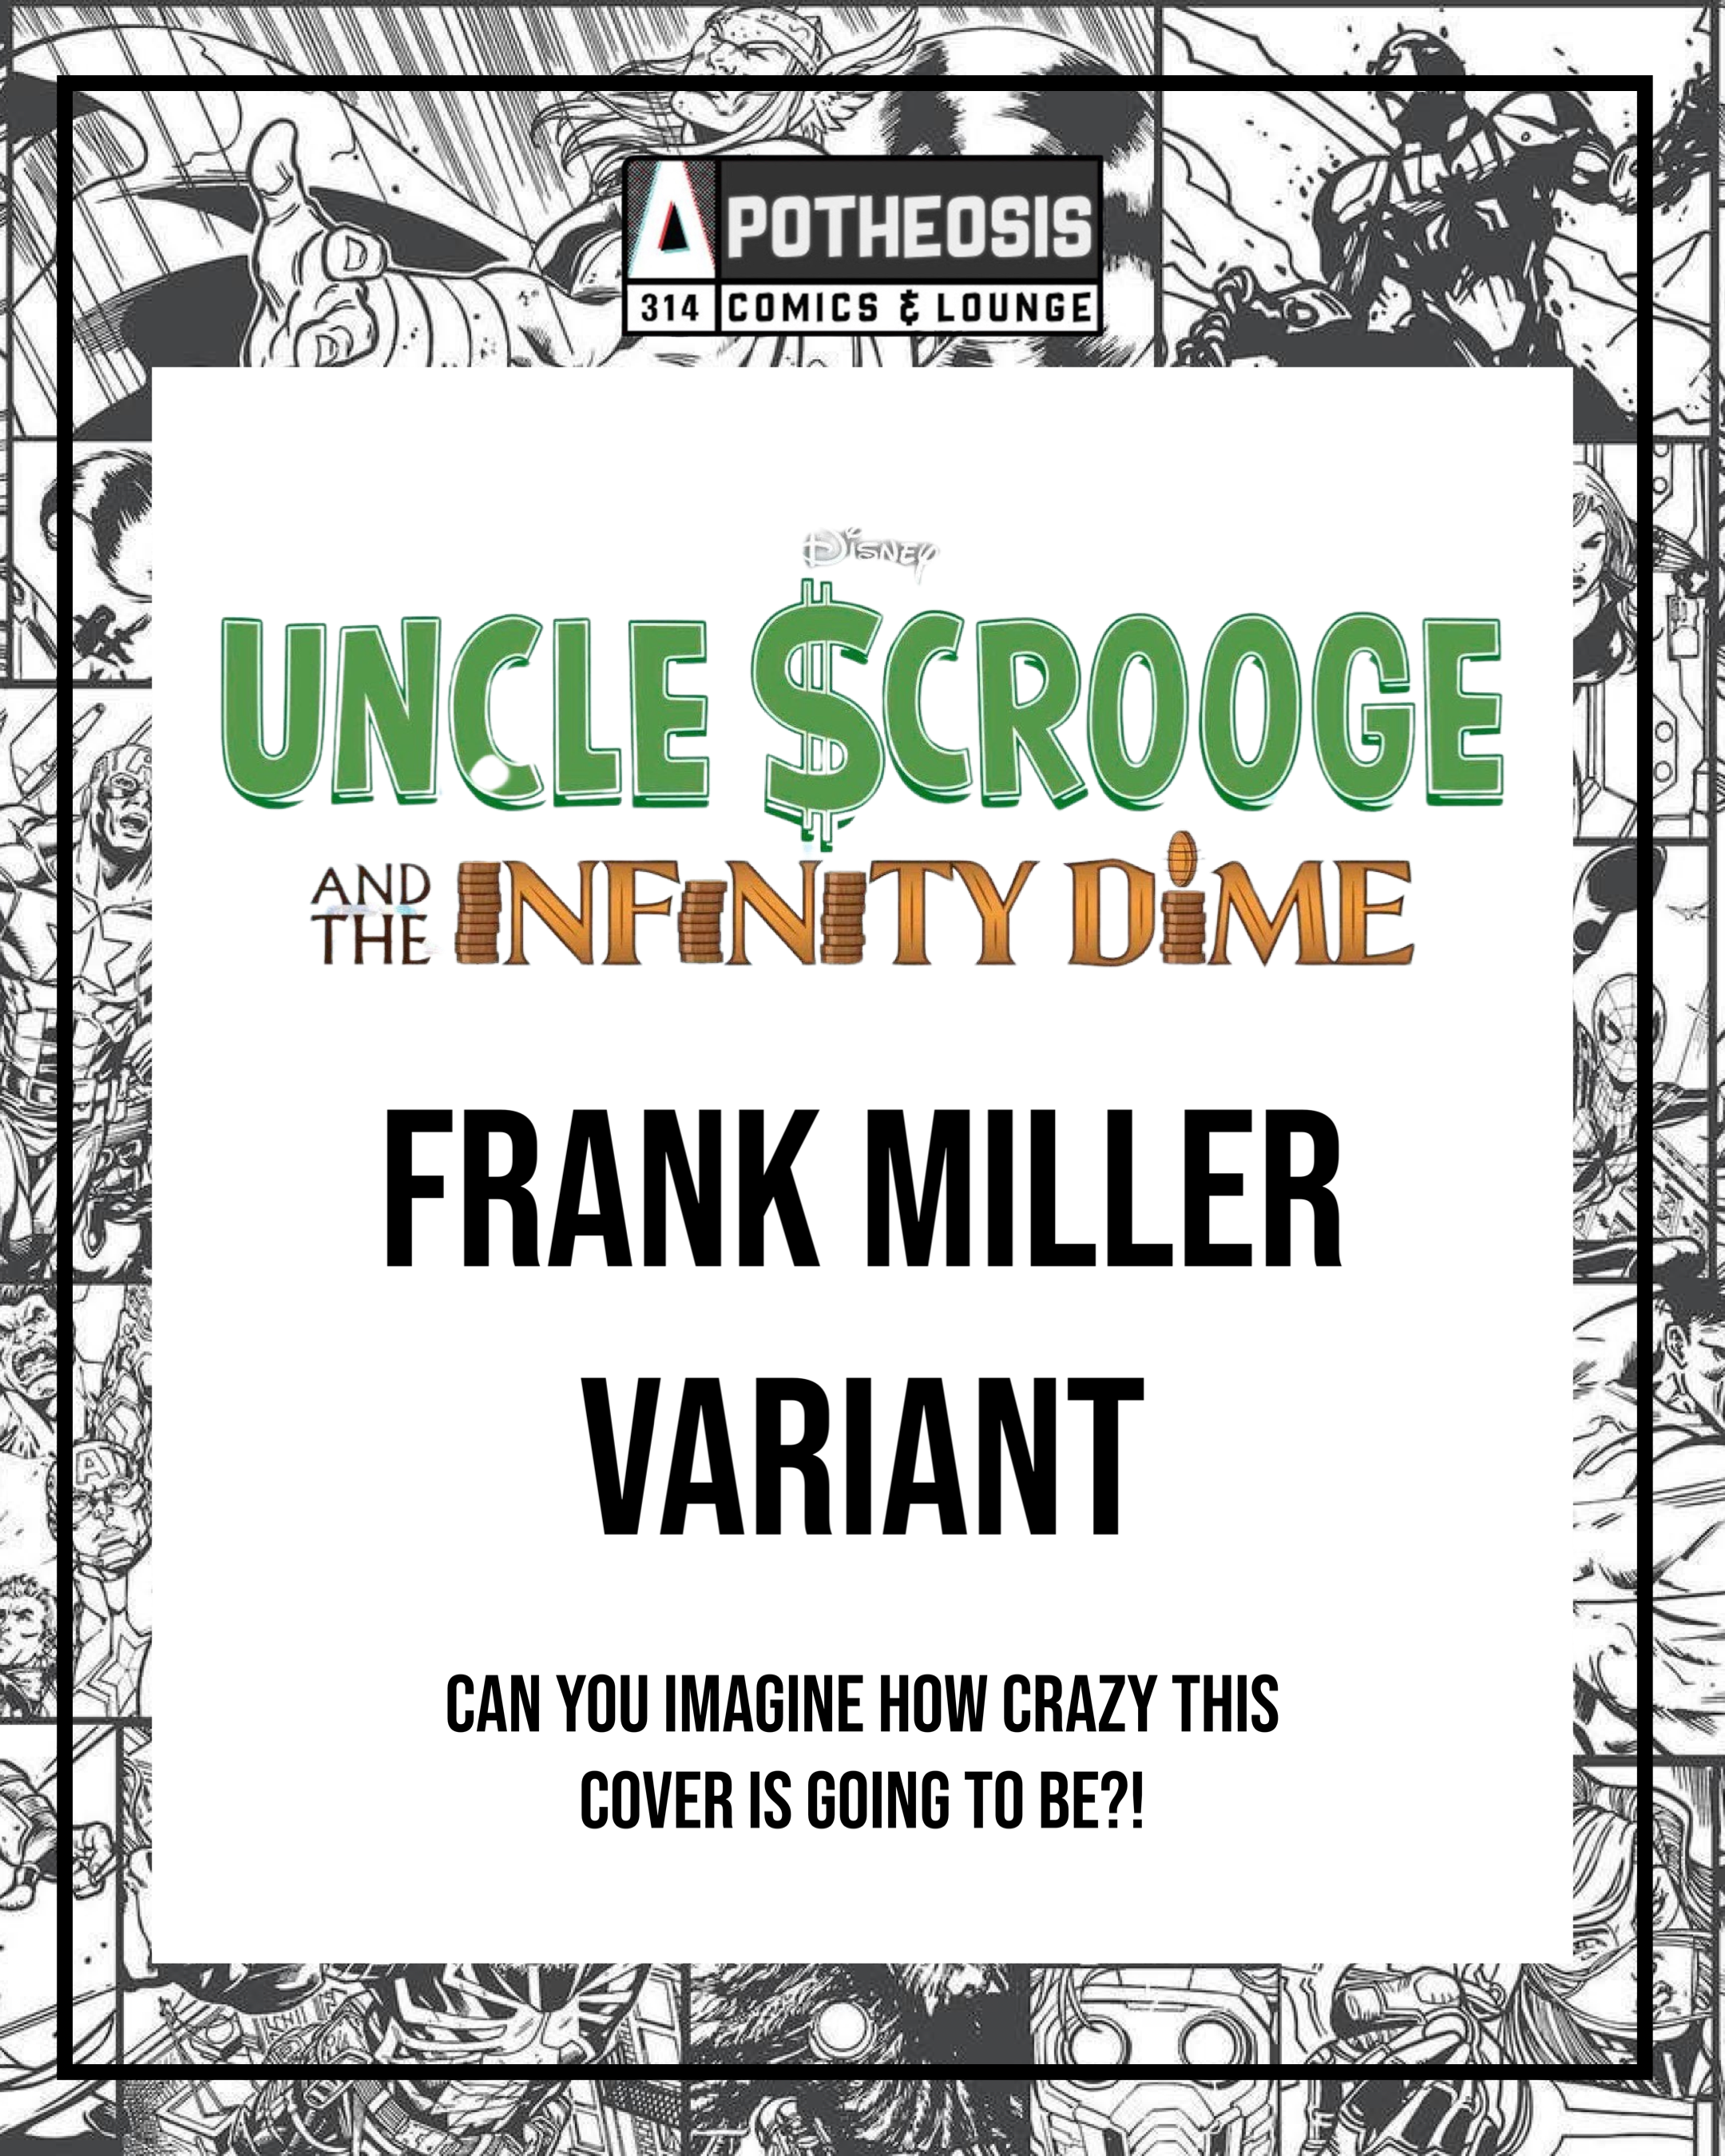 UNCLE SCROOGE AND THE INFINITY DIME #1 FRANK MILLER VARIANT